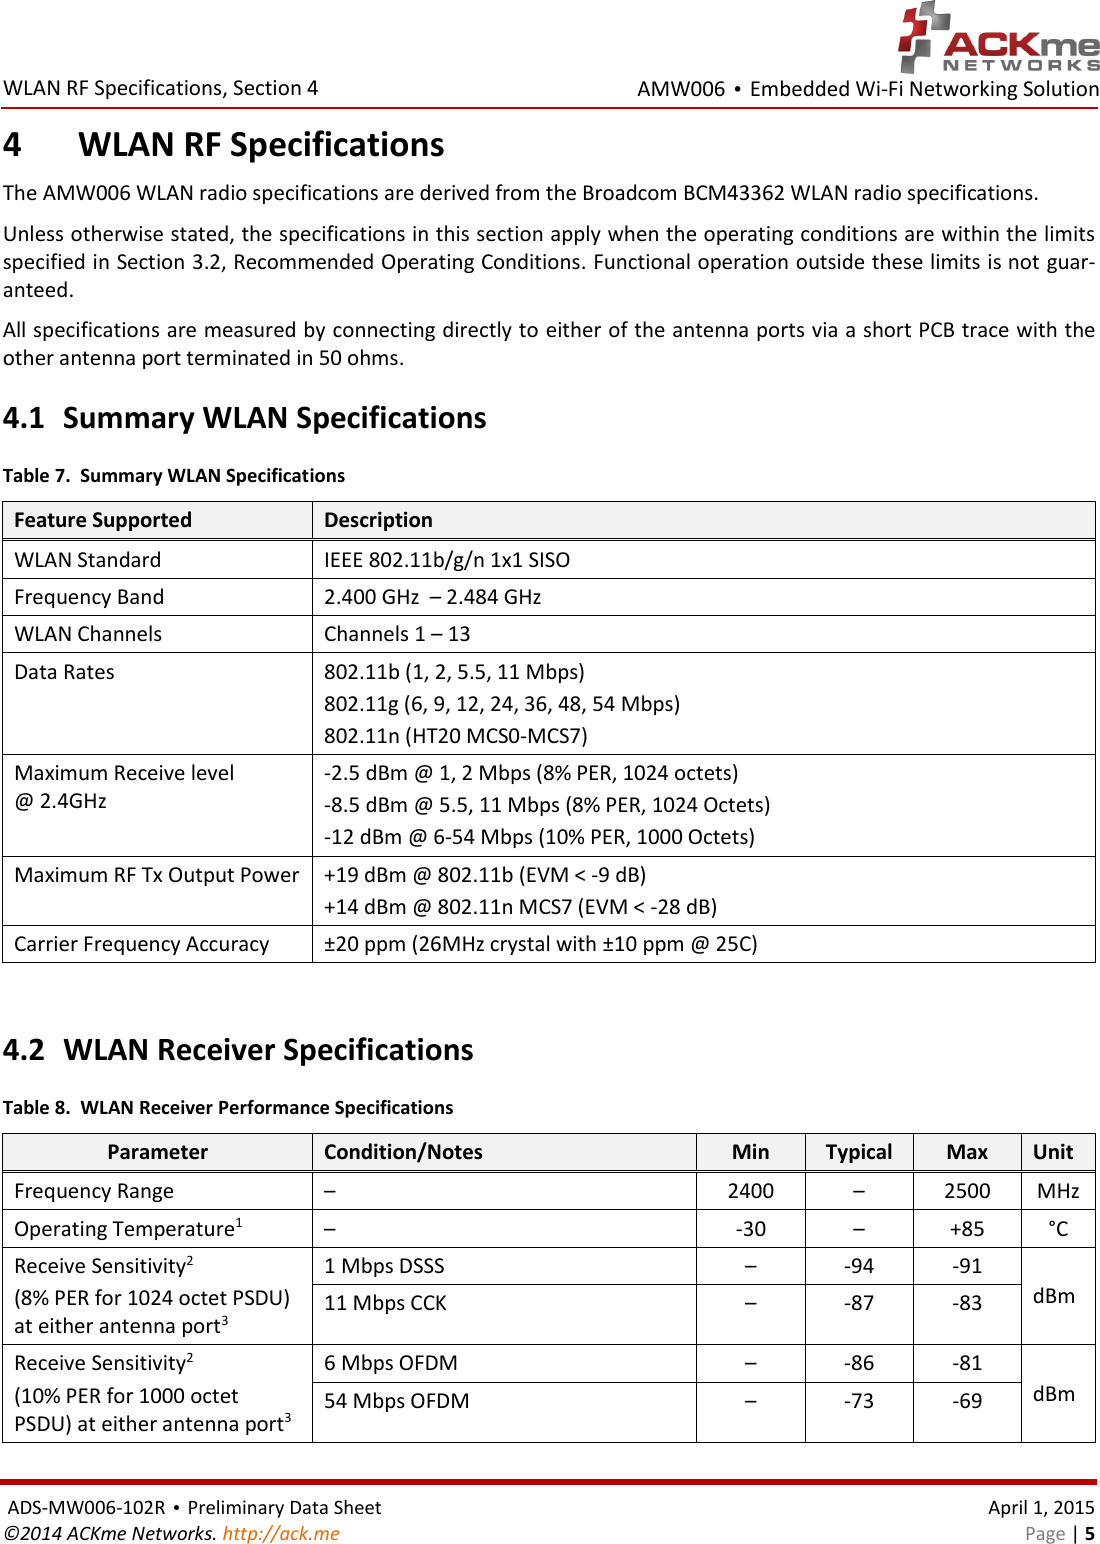 AMW006 • Embedded Wi-Fi Networking Solution  WLAN RF Specifications, Section 4  ADS-MW006-102R • Preliminary Data Sheet    April 1, 2015 ©2014 ACKme Networks. http://ack.me    Page | 5 4 WLAN RF Specifications The AMW006 WLAN radio specifications are derived from the Broadcom BCM43362 WLAN radio specifications. Unless otherwise stated, the specifications in this section apply when the operating conditions are within the limits specified in Section 3.2, Recommended Operating Conditions. Functional operation outside these limits is not guar-anteed. All specifications are measured by connecting directly to either of the antenna ports via a short PCB trace with the other antenna port terminated in 50 ohms. 4.1 Summary WLAN Specifications Table 7.  Summary WLAN Specifications Feature Supported Description WLAN Standard IEEE 802.11b/g/n 1x1 SISO Frequency Band 2.400 GHz  – 2.484 GHz WLAN Channels Channels 1 – 13 Data Rates 802.11b (1, 2, 5.5, 11 Mbps) 802.11g (6, 9, 12, 24, 36, 48, 54 Mbps) 802.11n (HT20 MCS0-MCS7) Maximum Receive level  @ 2.4GHz -2.5 dBm @ 1, 2 Mbps (8% PER, 1024 octets) -8.5 dBm @ 5.5, 11 Mbps (8% PER, 1024 Octets) -12 dBm @ 6-54 Mbps (10% PER, 1000 Octets) Maximum RF Tx Output Power +19 dBm @ 802.11b (EVM &lt; -9 dB) +14 dBm @ 802.11n MCS7 (EVM &lt; -28 dB) Carrier Frequency Accuracy ±20 ppm (26MHz crystal with ±10 ppm @ 25C)  4.2 WLAN Receiver Specifications Table 8.  WLAN Receiver Performance Specifications Parameter Condition/Notes Min Typical Max Unit Frequency Range –  2400 – 2500 MHz Operating Temperature1 – -30 – +85 °C Receive Sensitivity2 (8% PER for 1024 octet PSDU) at either antenna port3 1 Mbps DSSS – -94 -91 dBm 11 Mbps CCK – -87 -83 Receive Sensitivity2 (10% PER for 1000 octet PSDU) at either antenna port3 6 Mbps OFDM – -86 -81 dBm 54 Mbps OFDM – -73 -69 